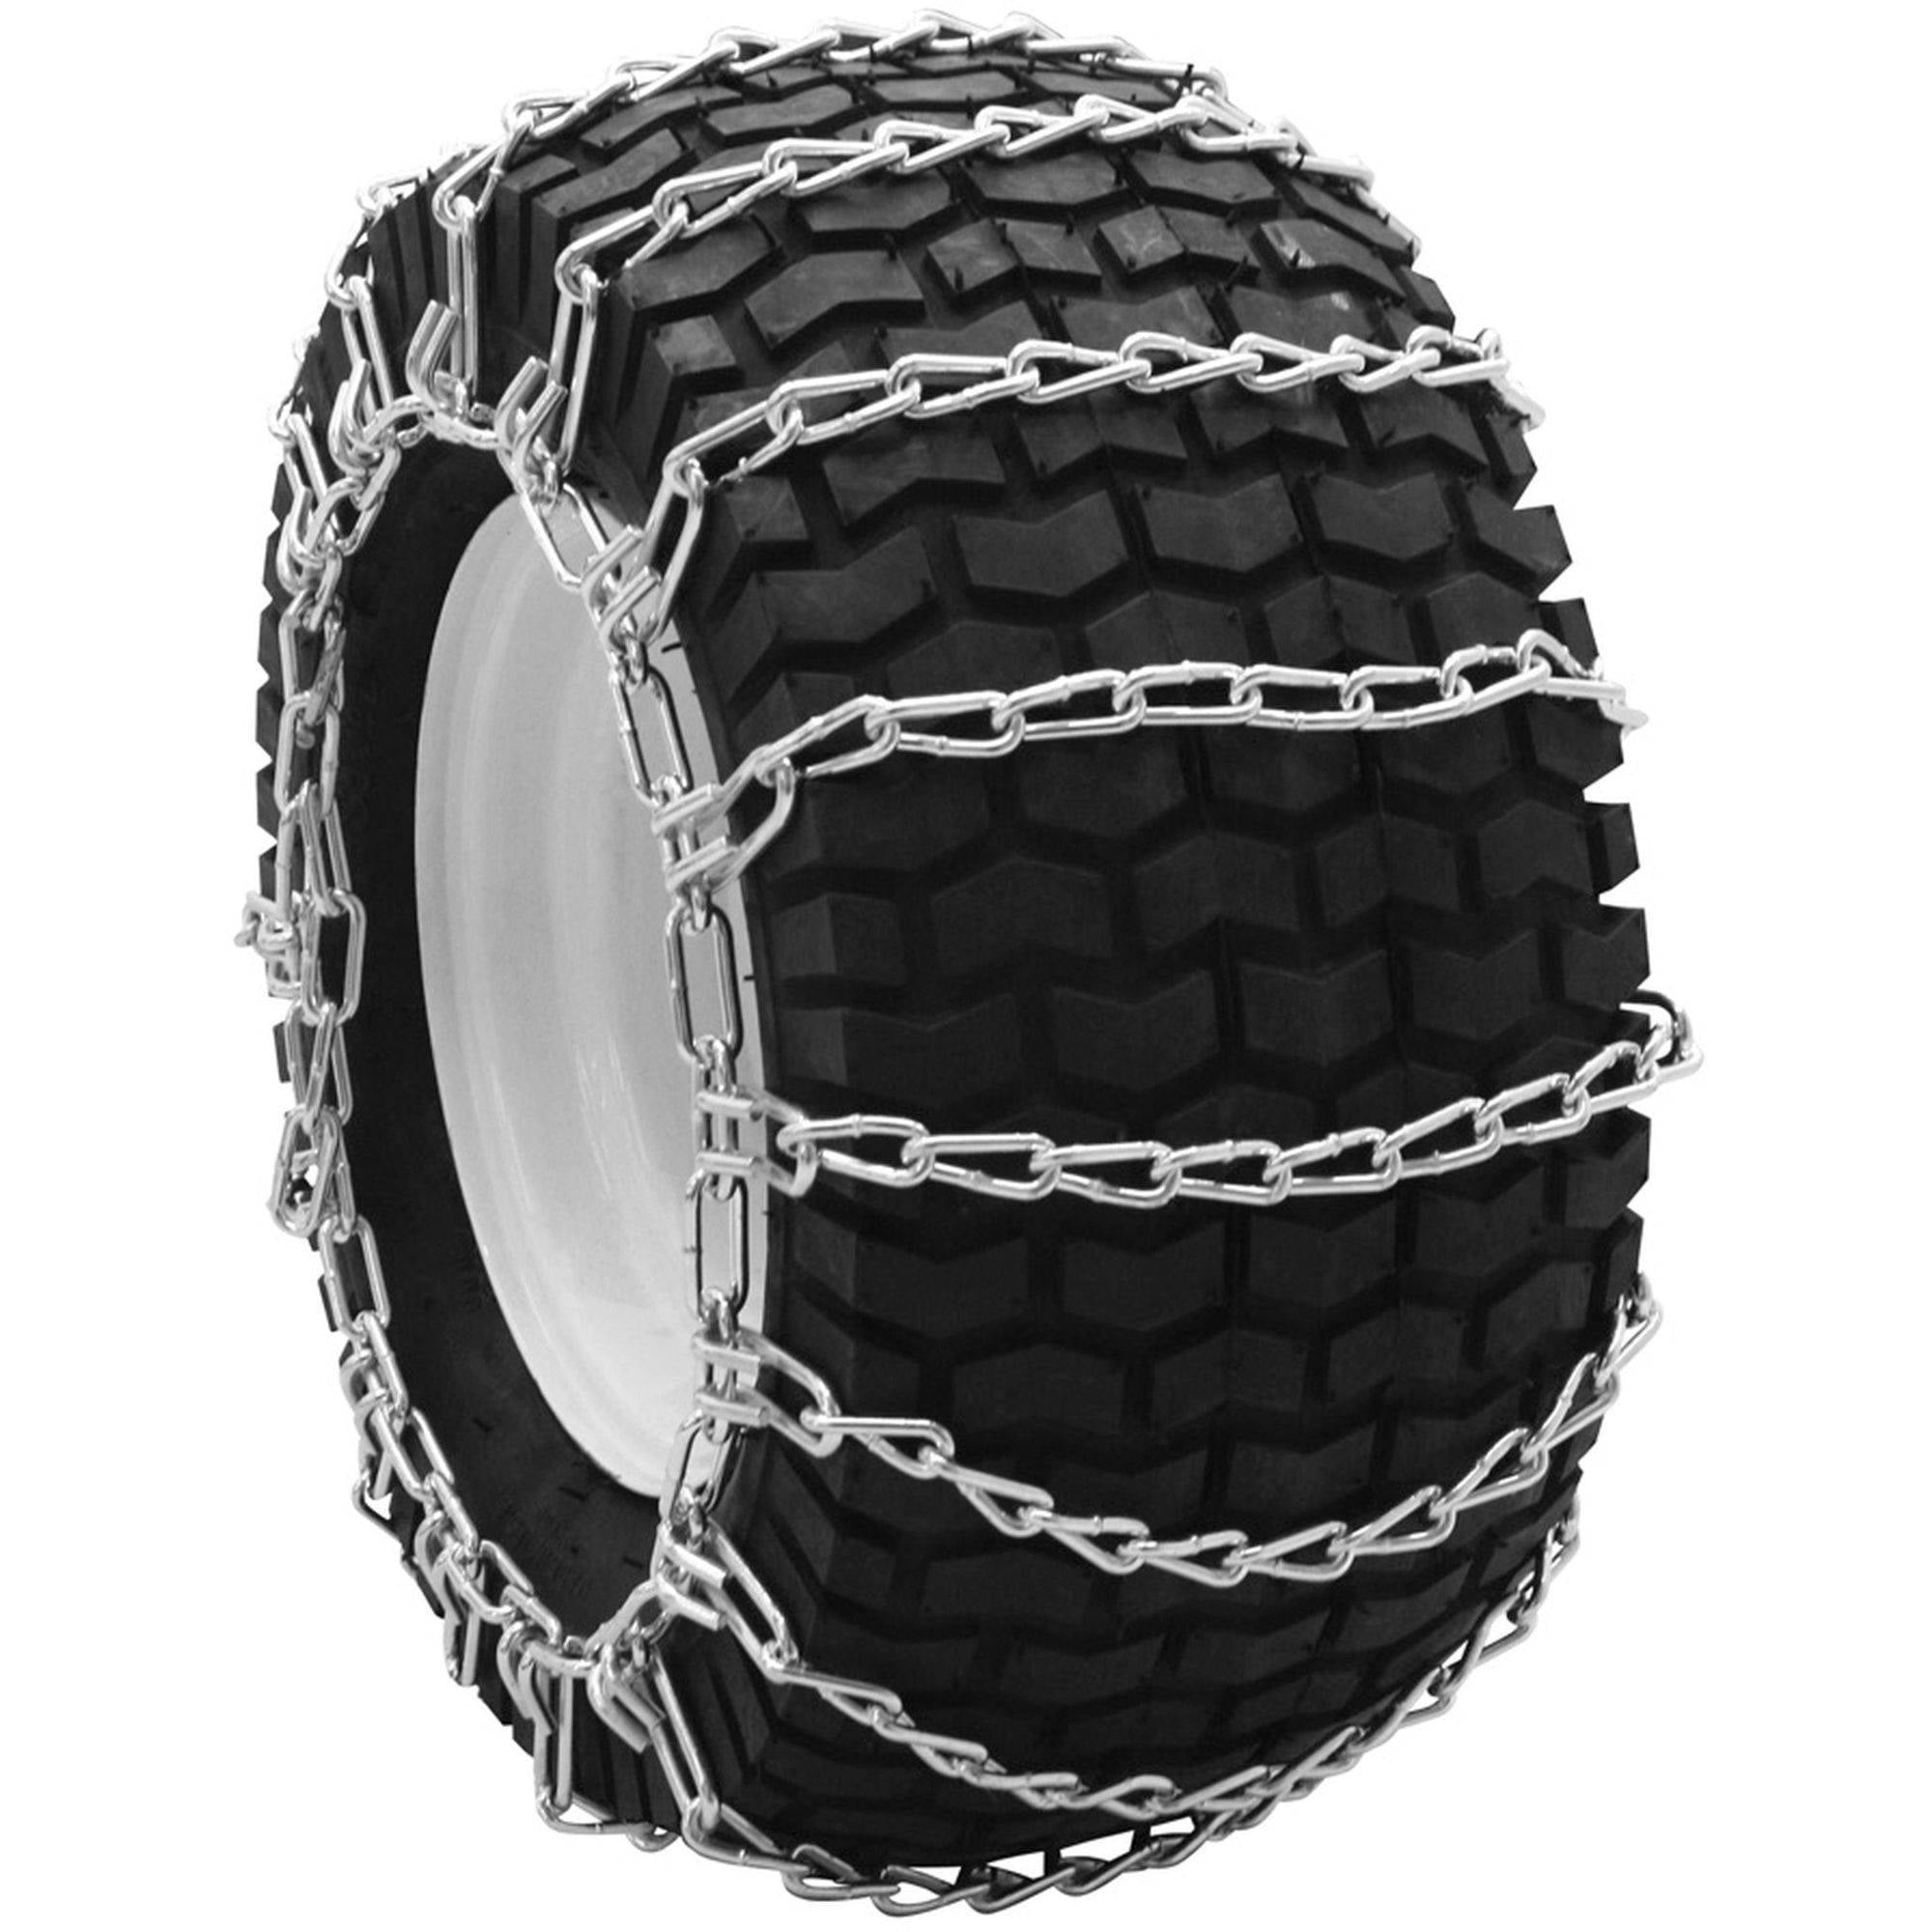 PAIR 2 Link TIRE CHAINS 20x8.00x8 for MTD Cub Cadet Lawn Mower Tractor Rider 